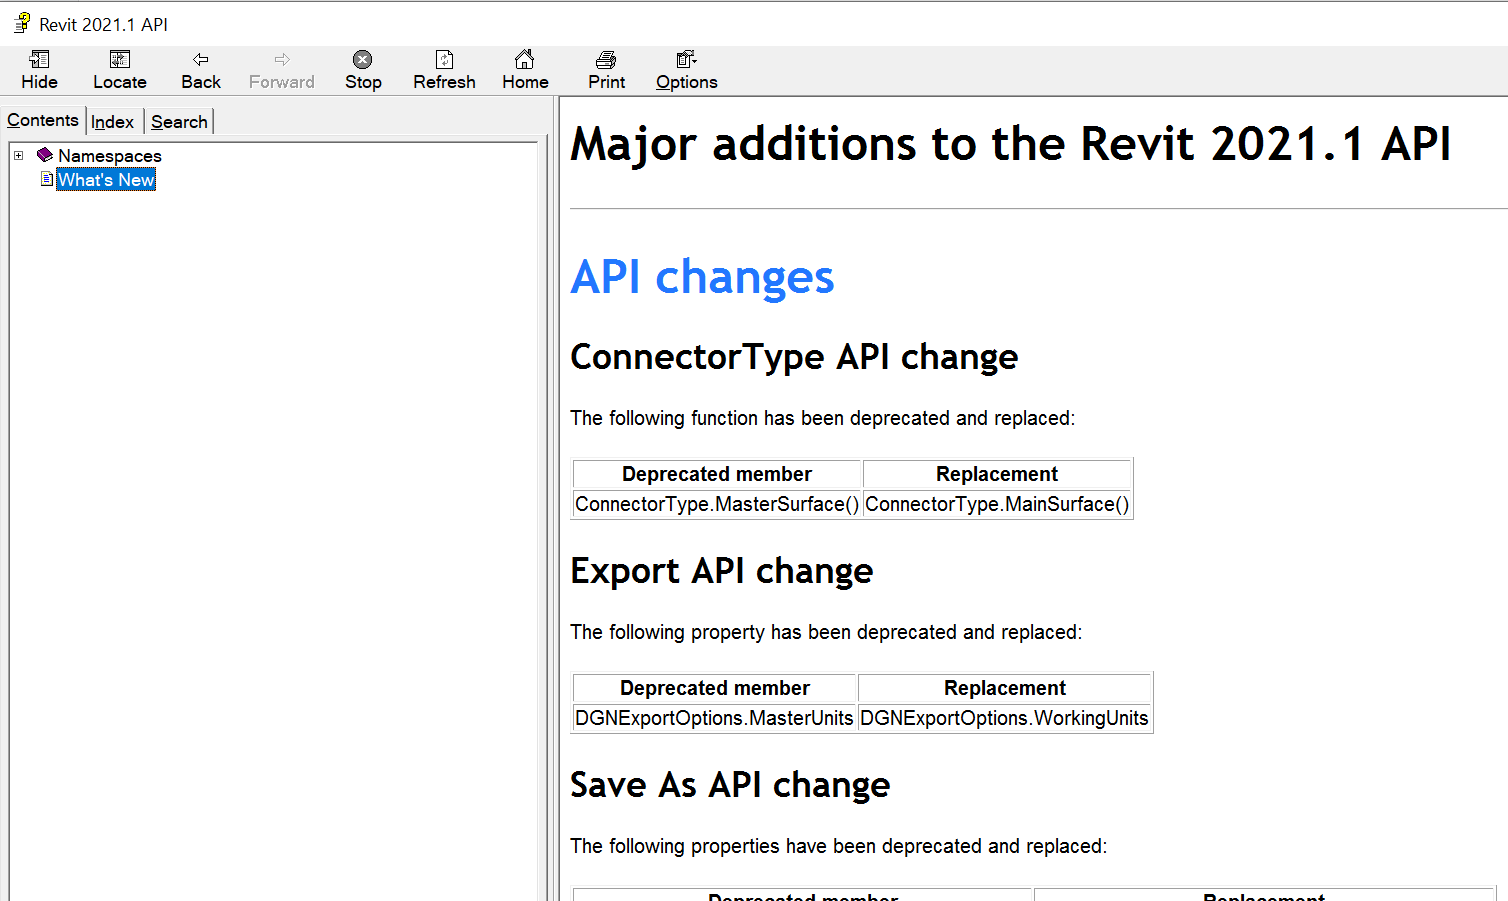 Revit 2021.1 API help file section on What's New